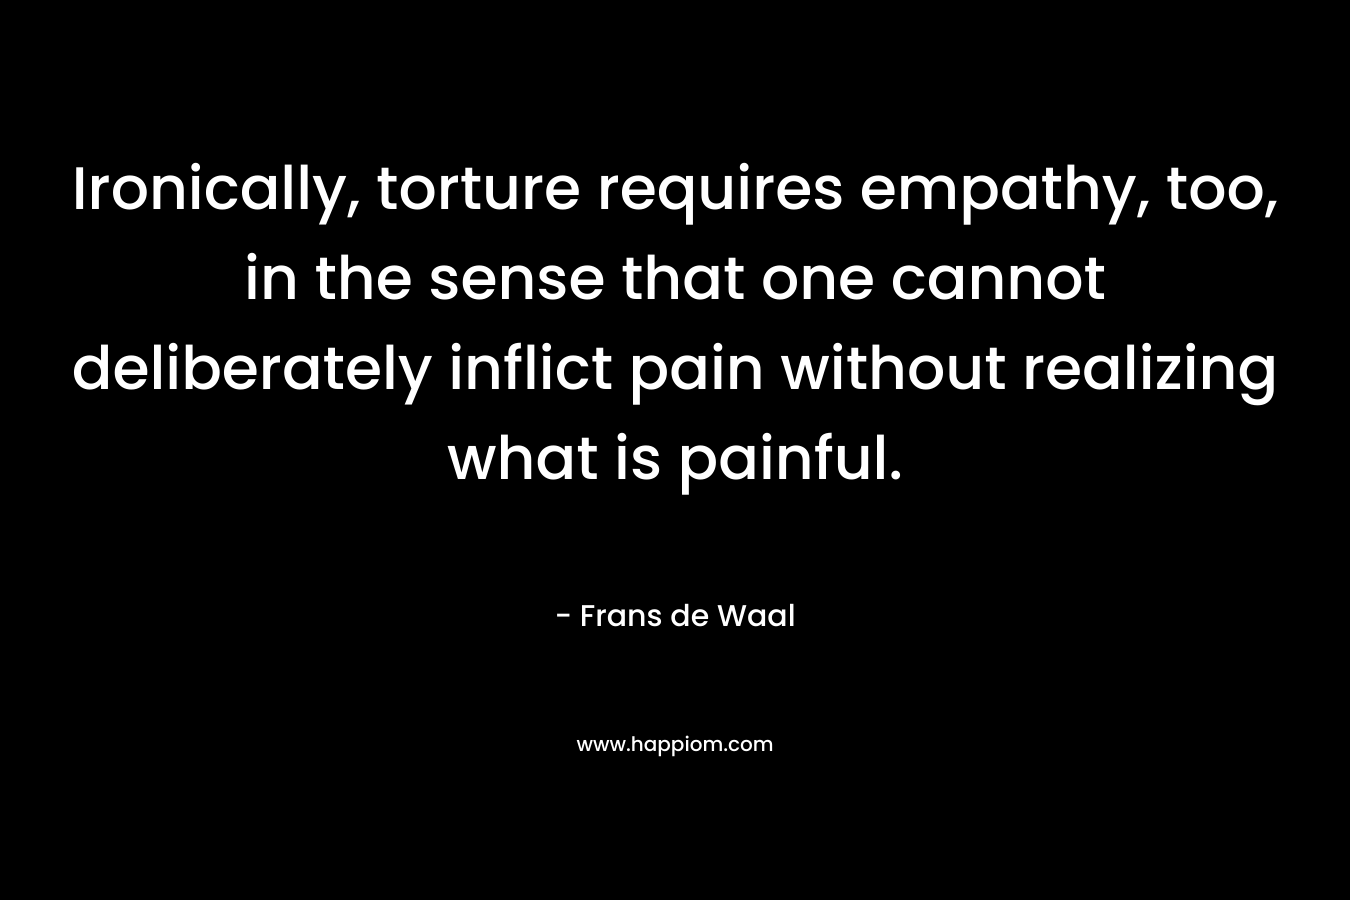 Ironically, torture requires empathy, too, in the sense that one cannot deliberately inflict pain without realizing what is painful. – Frans de Waal